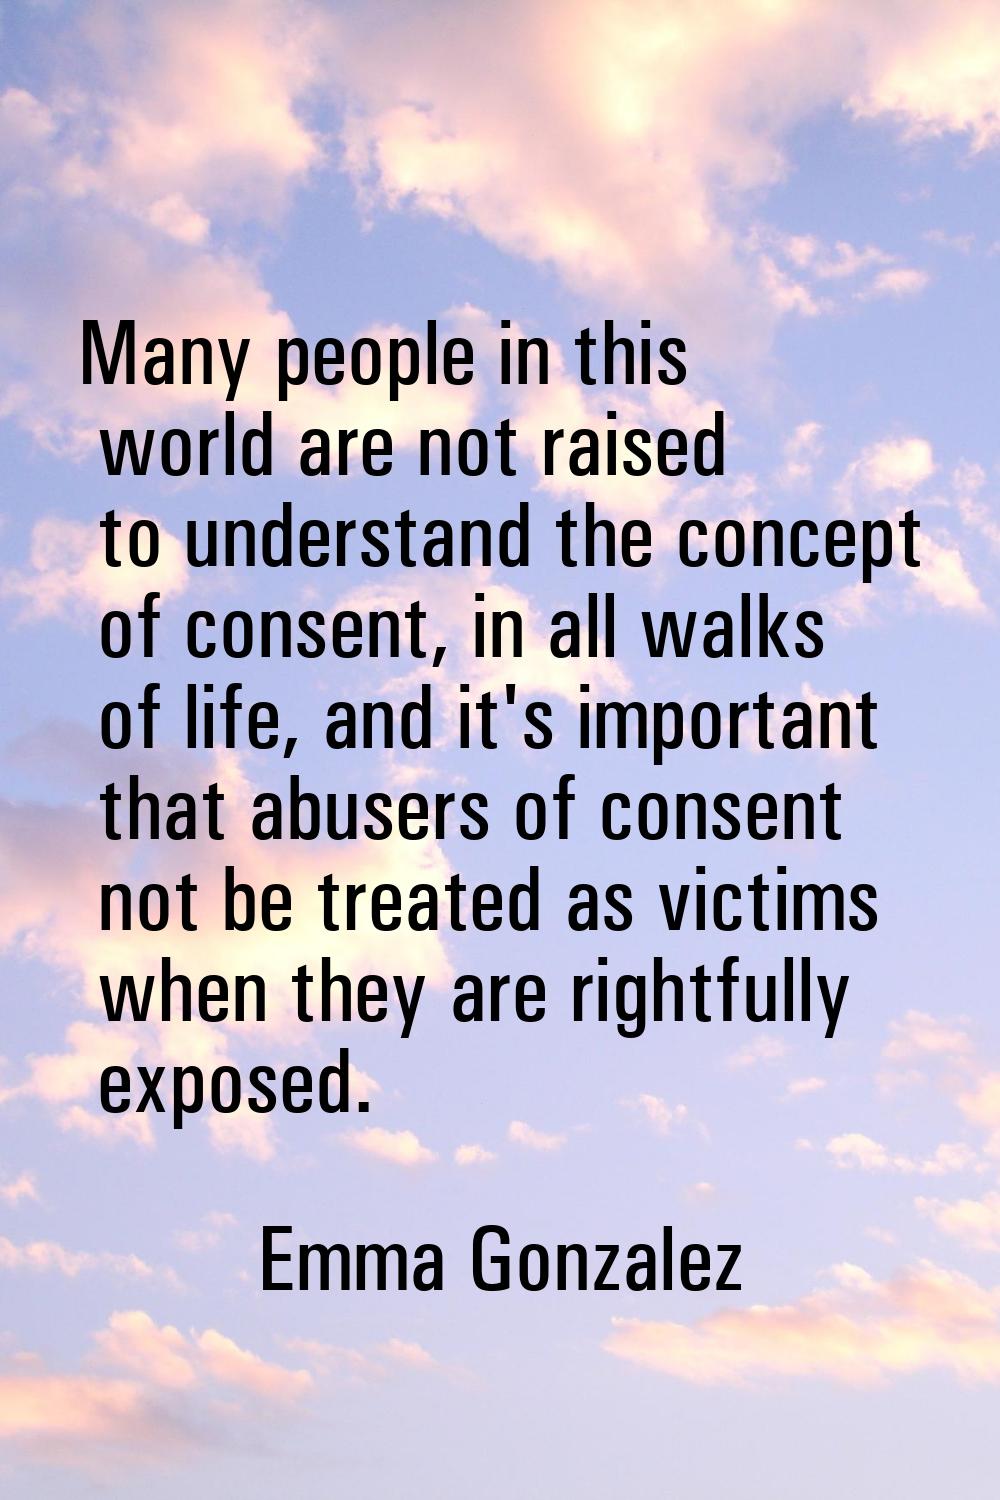 Many people in this world are not raised to understand the concept of consent, in all walks of life